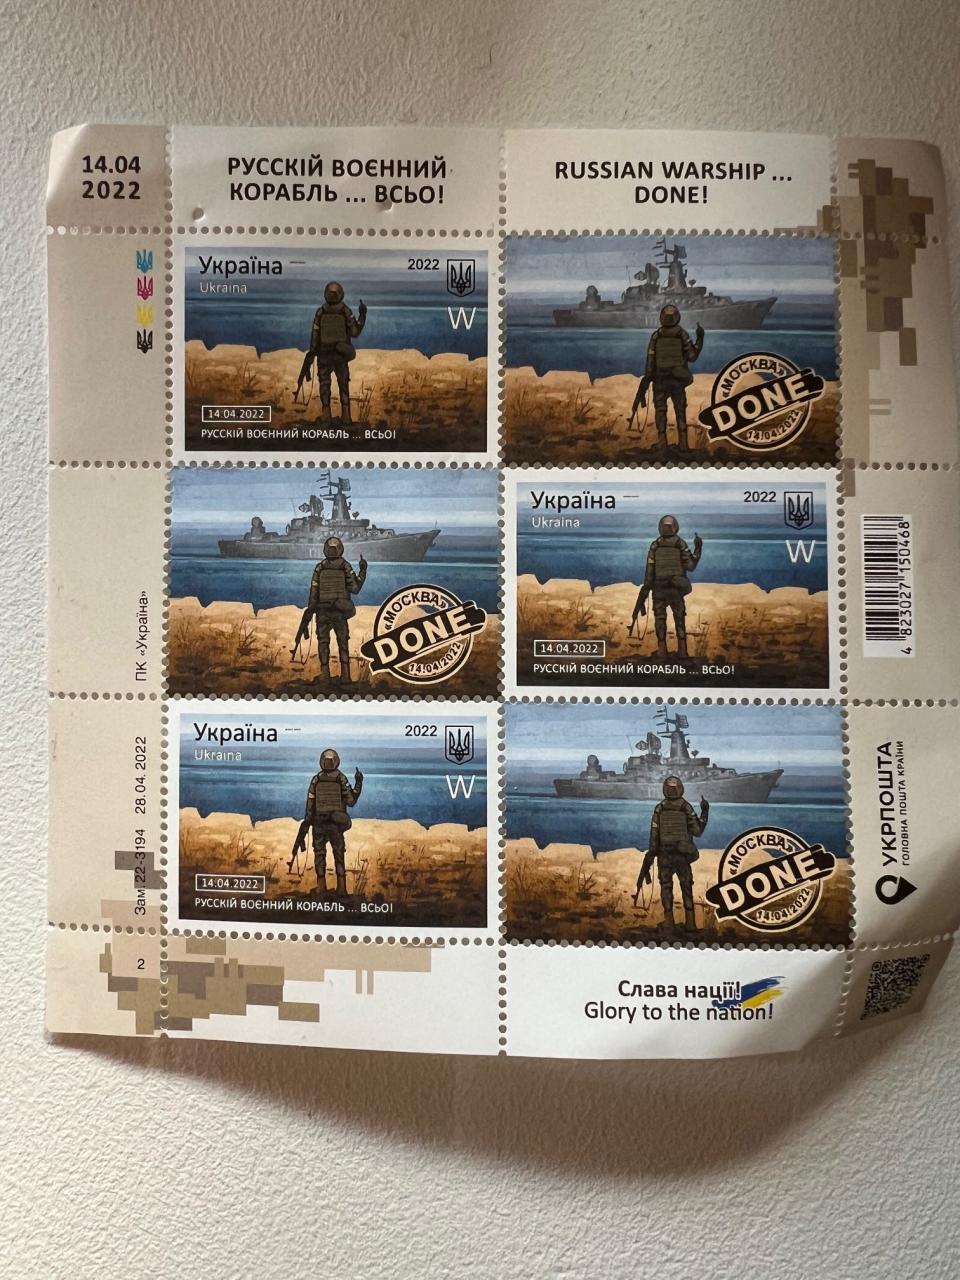 A limited-edition stamp, which features a Ukrainian special forces fighter defiantly raising his middle finger to a Russian warship.